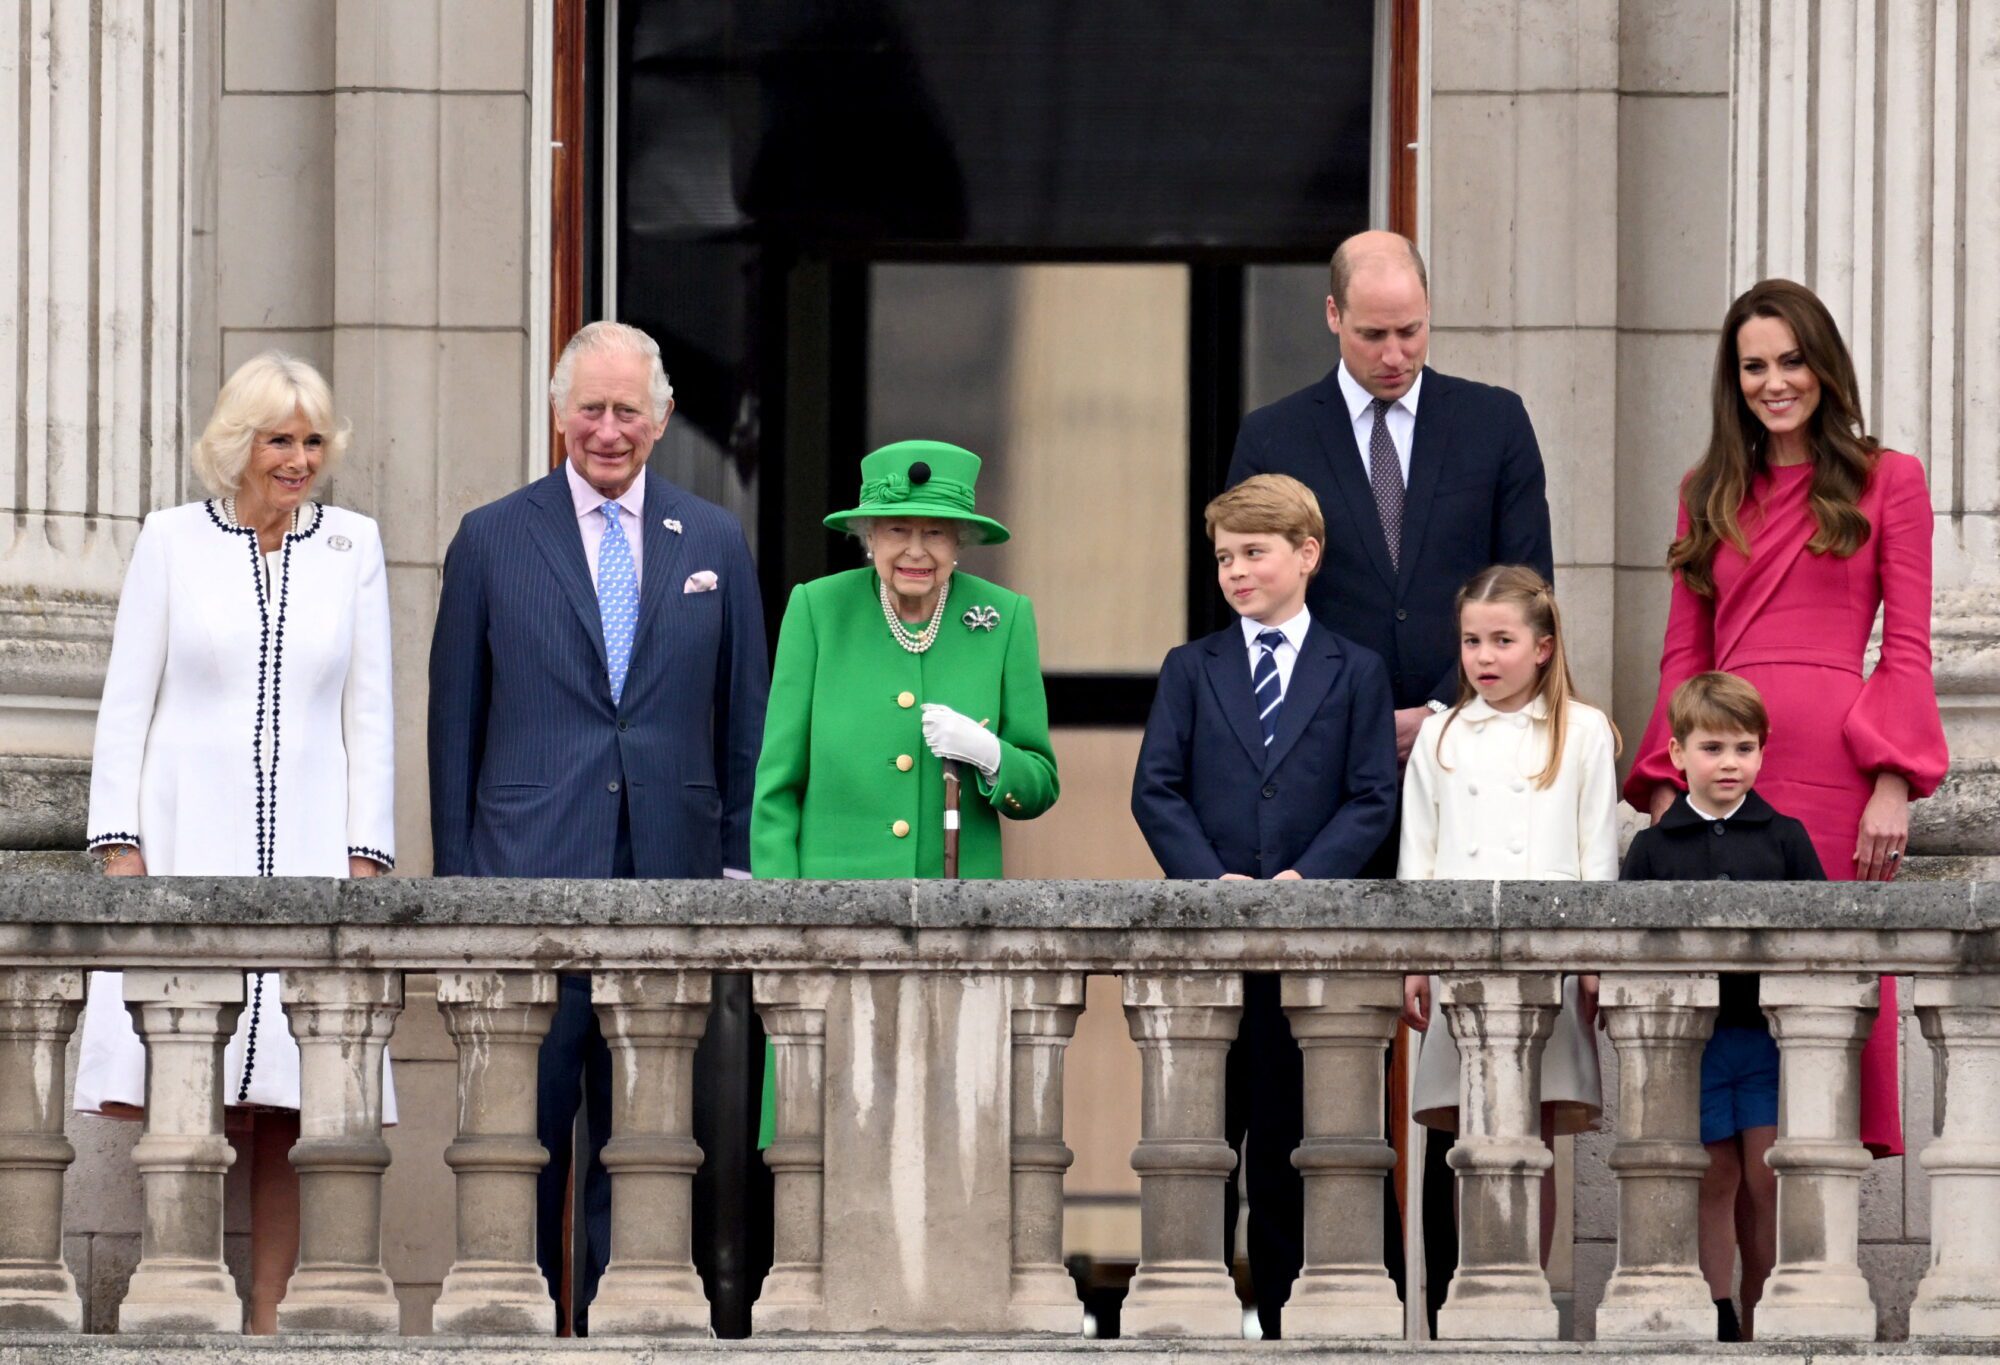 Camilla, Duchess of Cornwall, Prince Charles, Queen Elizabeth, Prince George, Prince William, Princess Charlotte, Prince Louis and Catherine, Duchess of Cambridge stand on the balcony during the Platinum Pageant, marking the end of the celebrations for the Platinum Jubilee of Britain's Queen Elizabeth, in London, Britain, June 5, 2022. Leon Neal/Pool via REUTERS